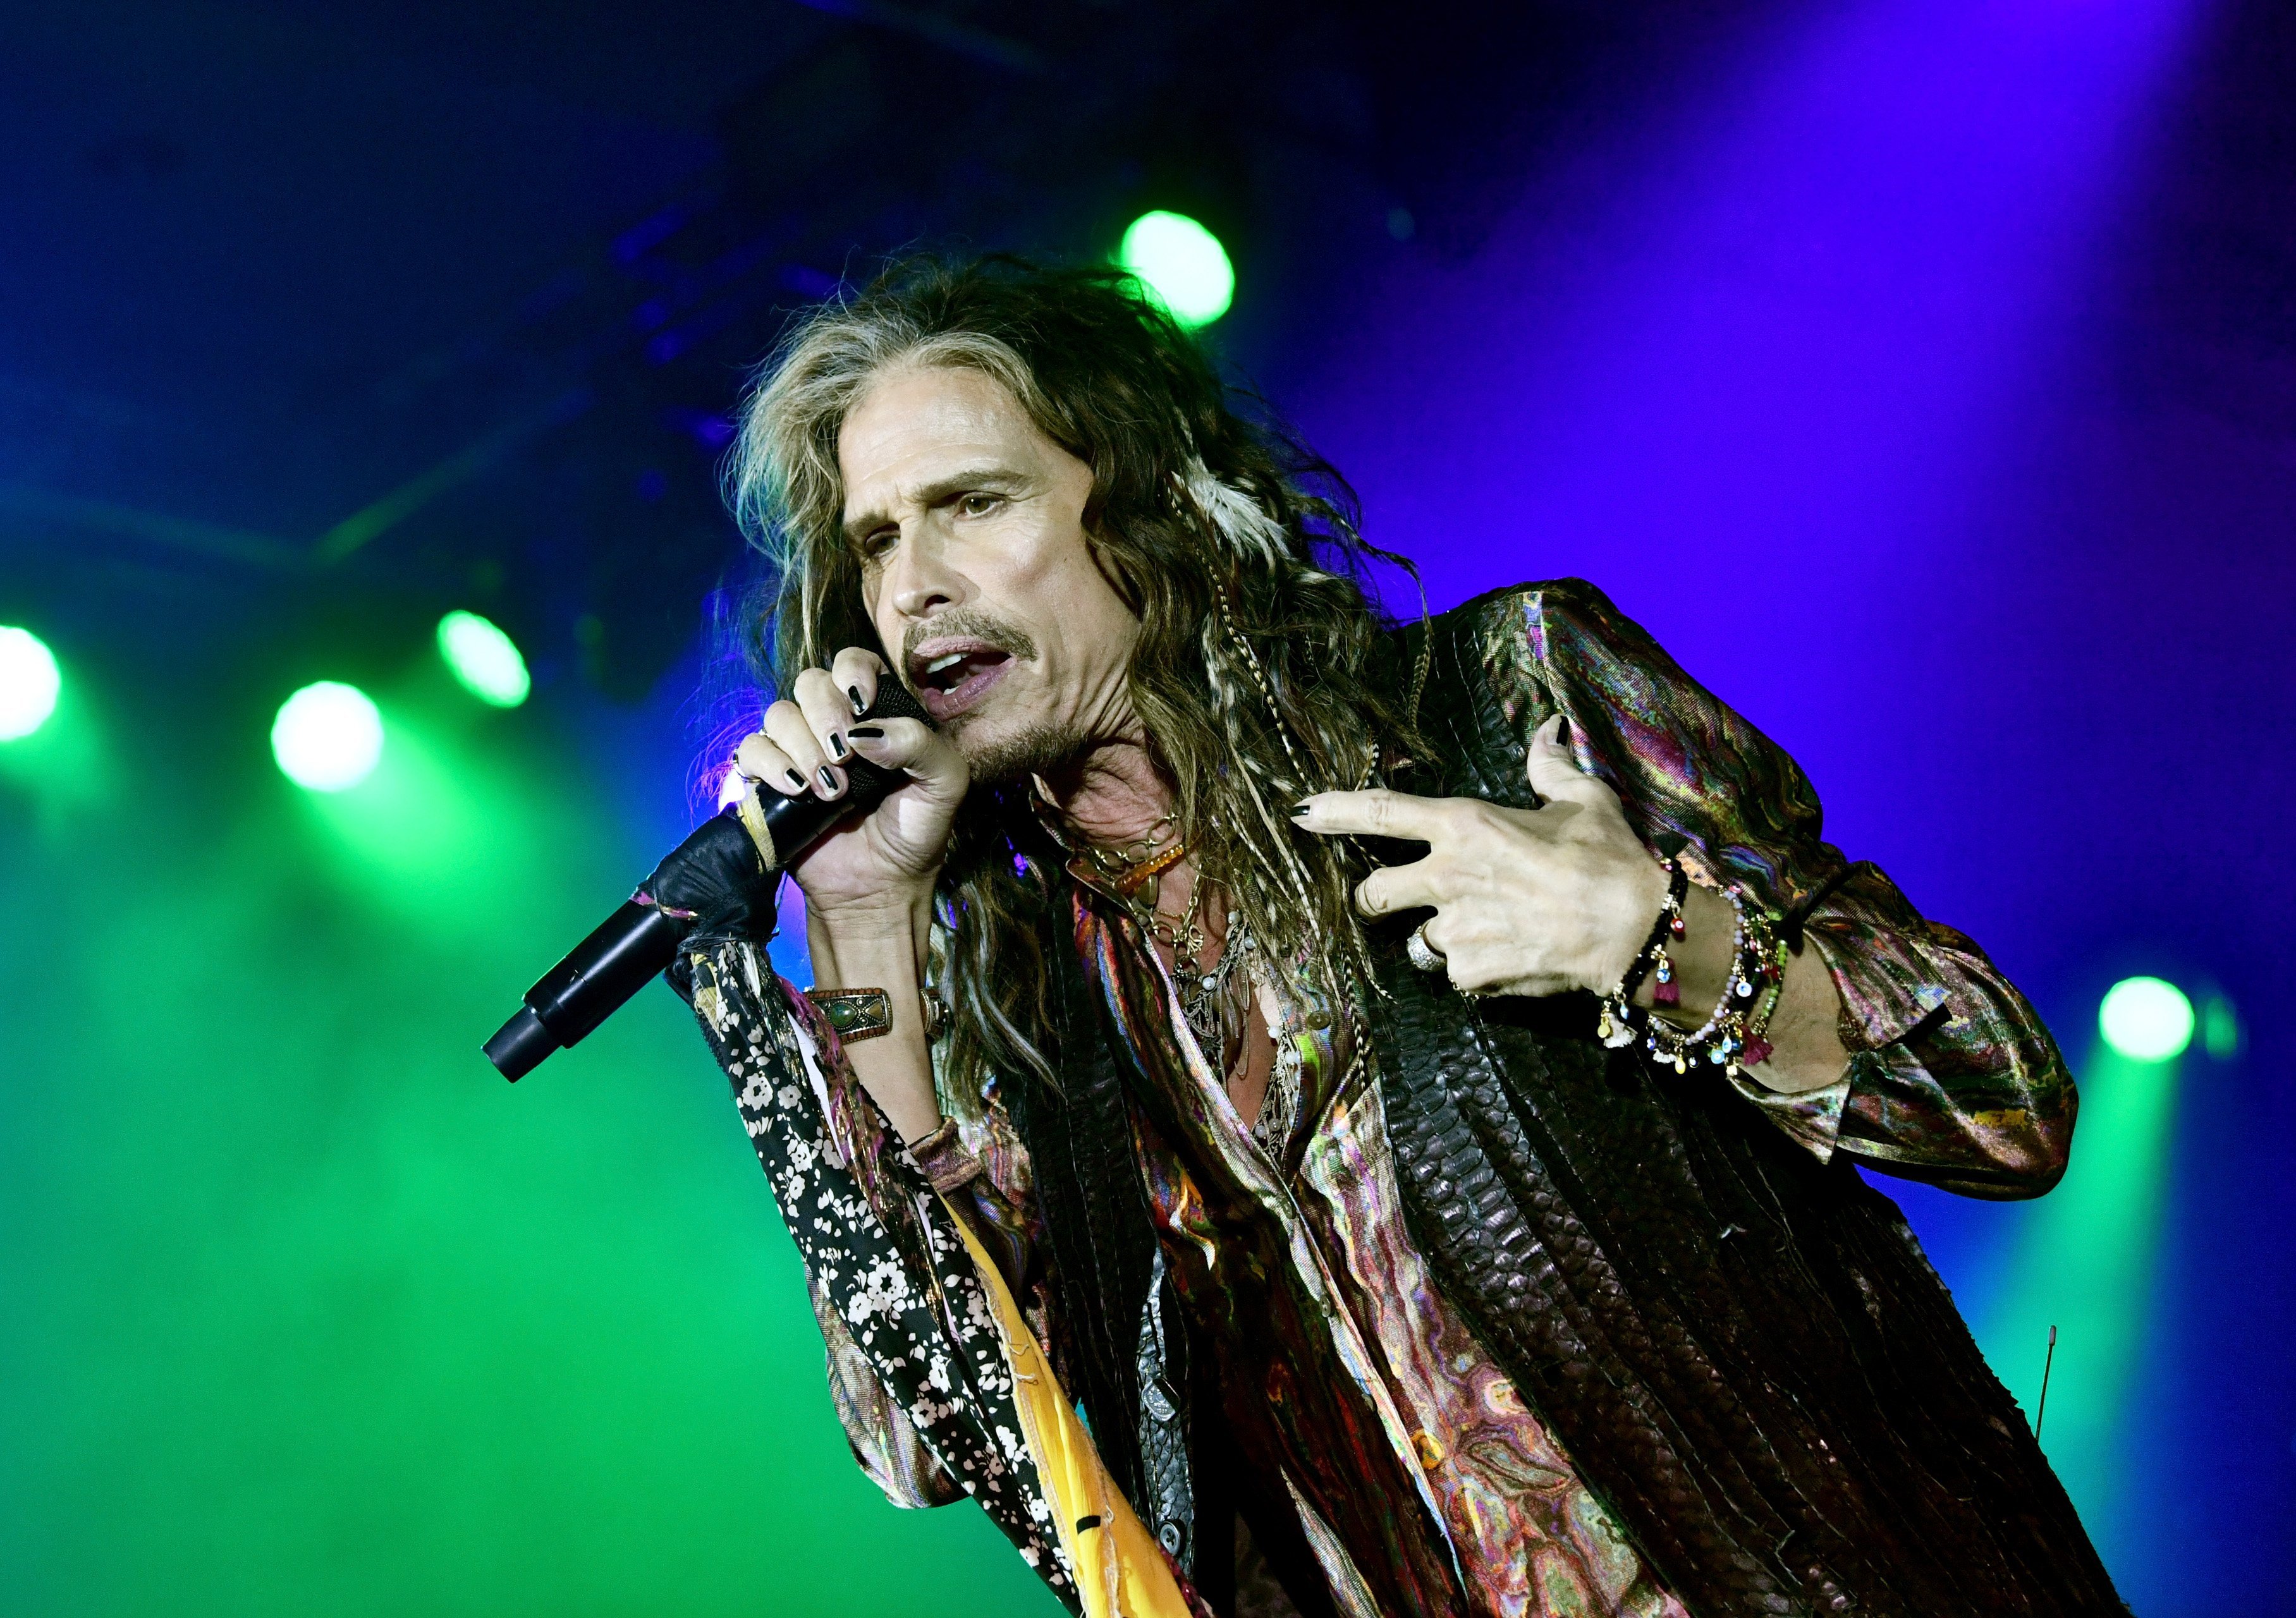 Steven Tyler performs onstage at Celebrity Fight Night XXIV on March 10, 2018 | Photo: GettyImages